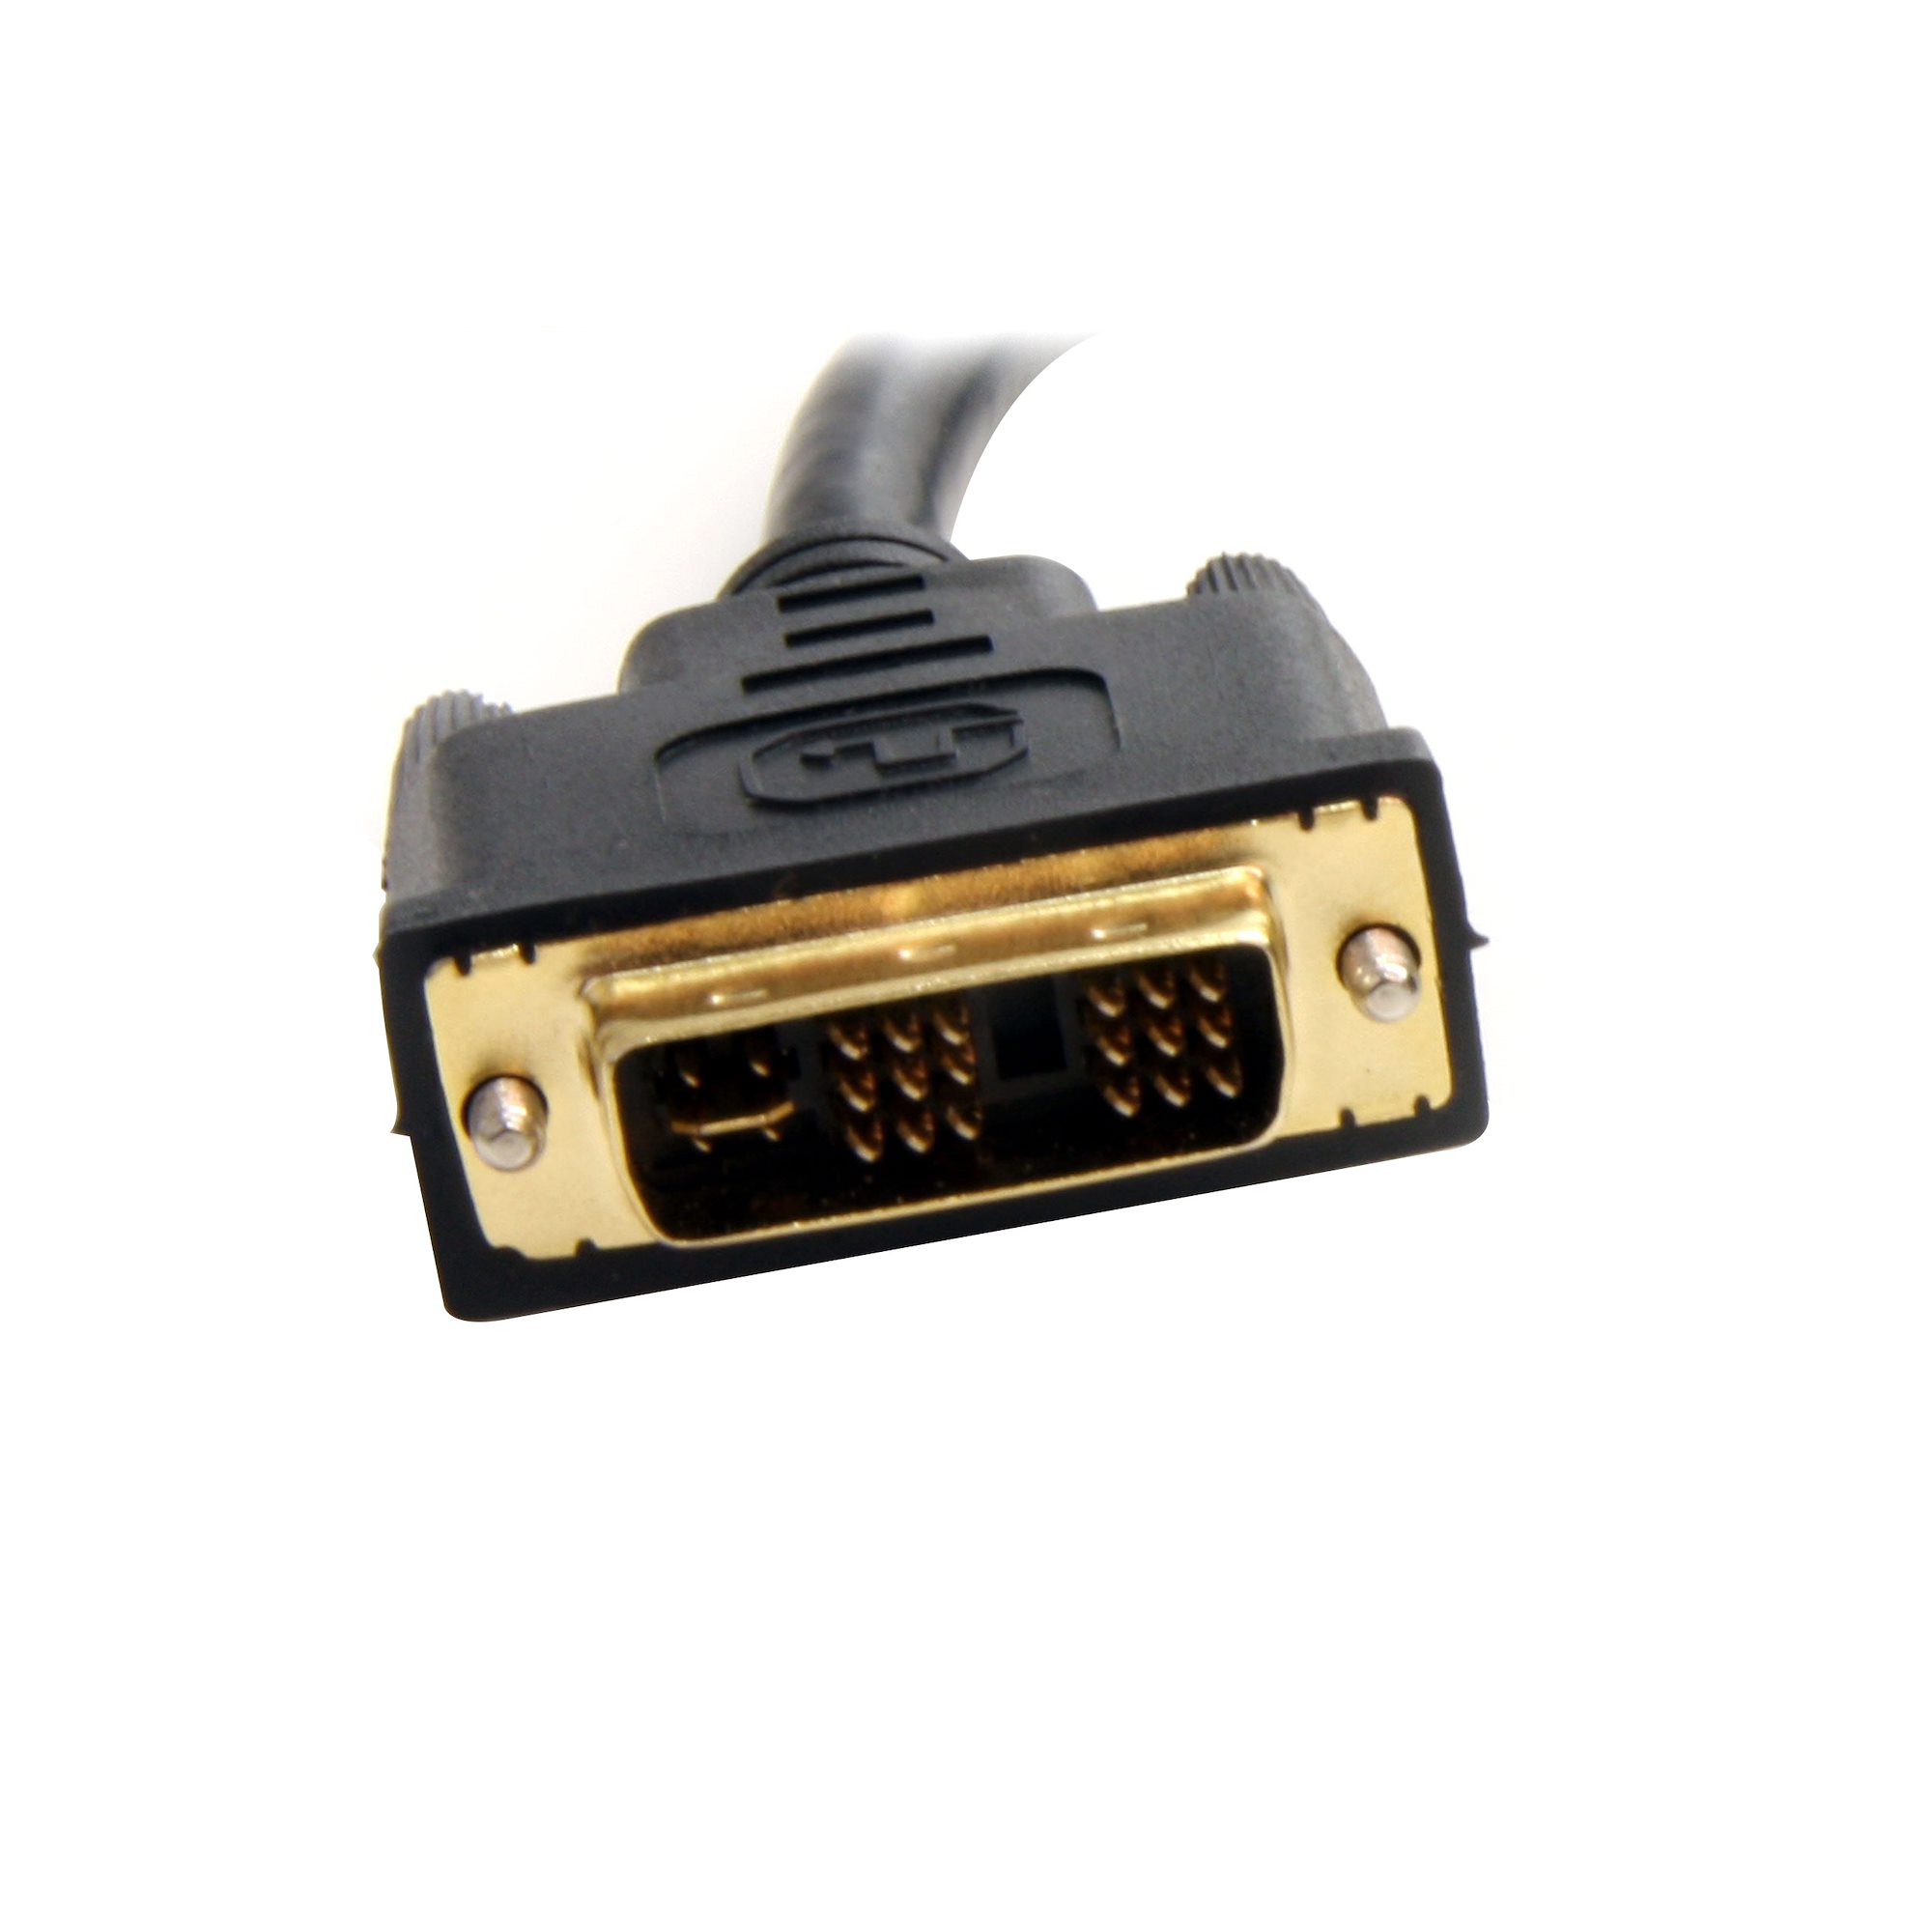 1ft HDMI Splitter Cable, HDMI Male to DVI-D Female Adapter, Full HD  1920x1200p 60Hz, 28AWG, Gold Plated Connectors, HDMI Male to DVI Female  Splitter